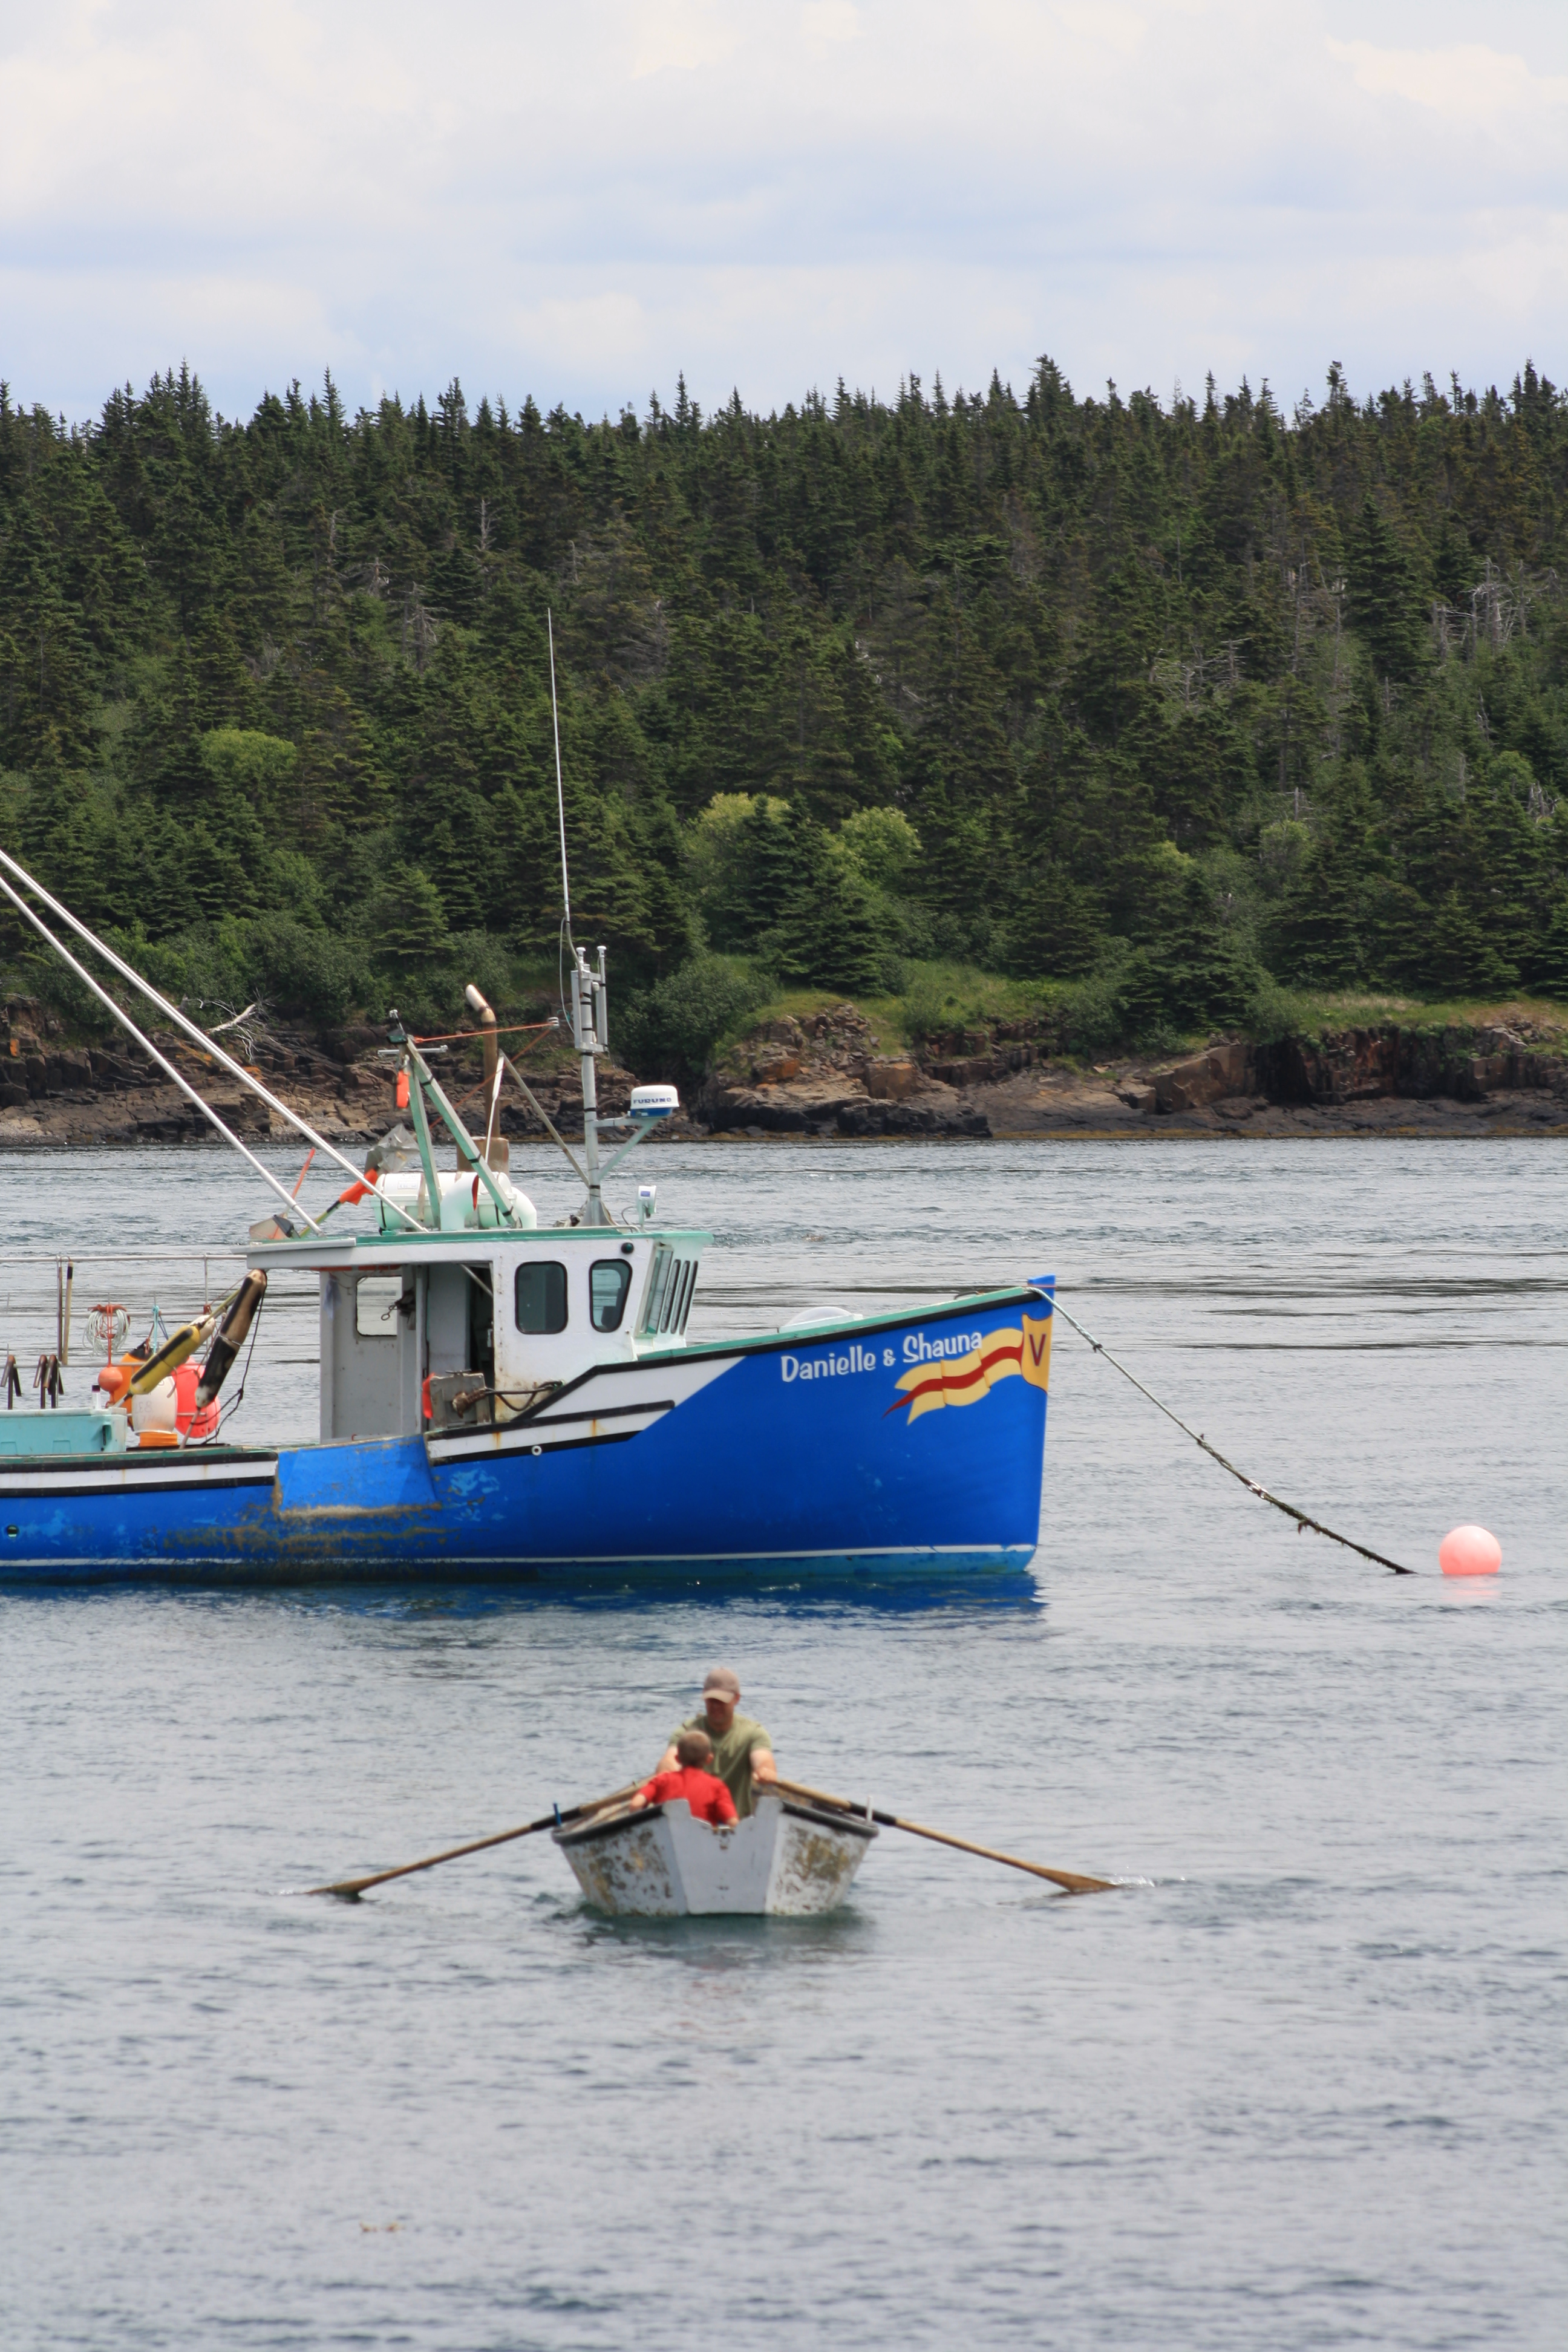 A man and his son row a small boat towards a larger fishing vessel. Behind the vessel is a forest coastline.